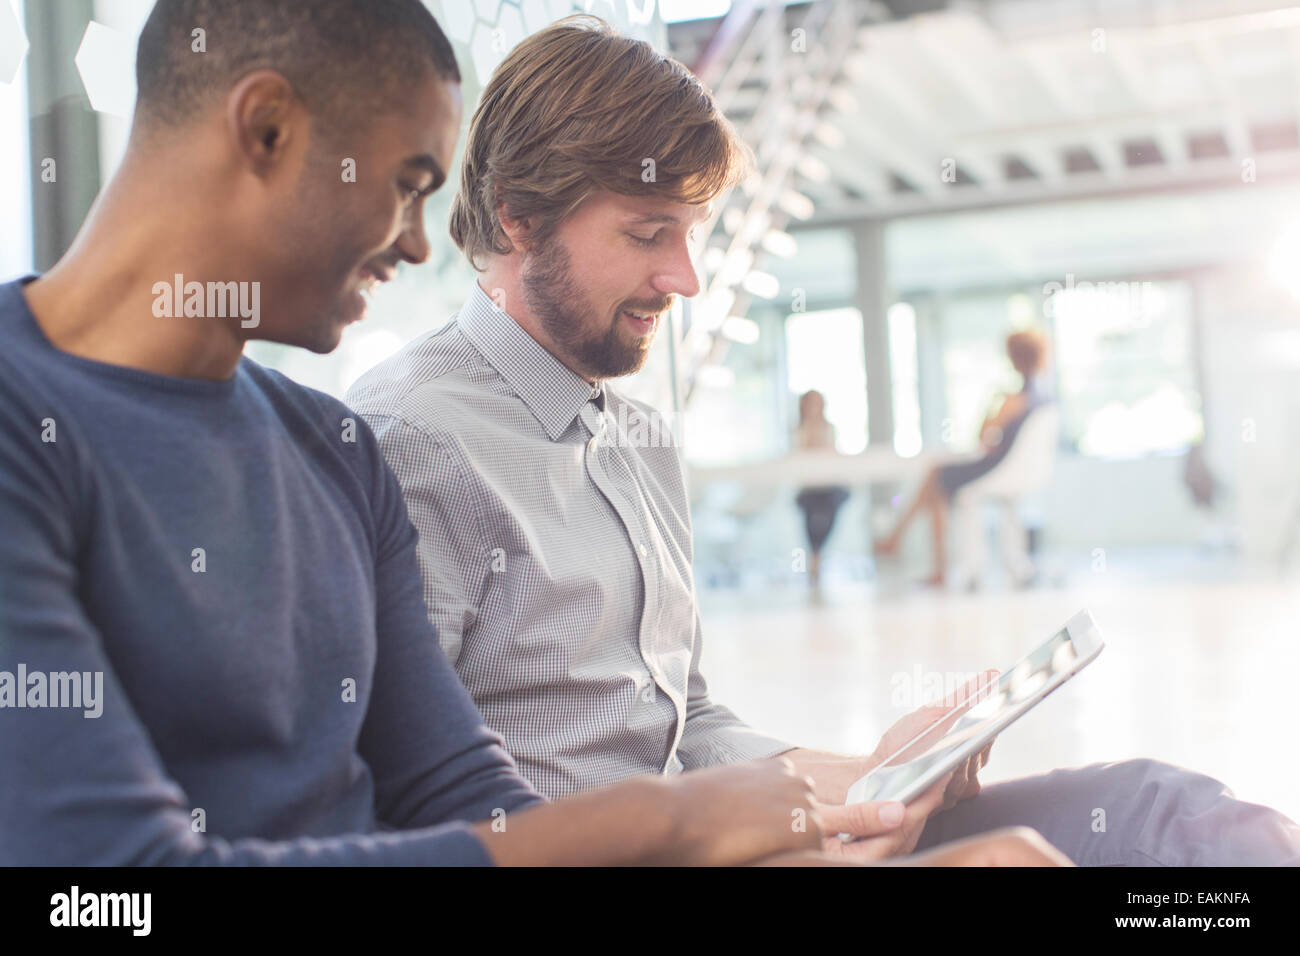 Two smiling businessmen using digital tablet in office Stock Photo